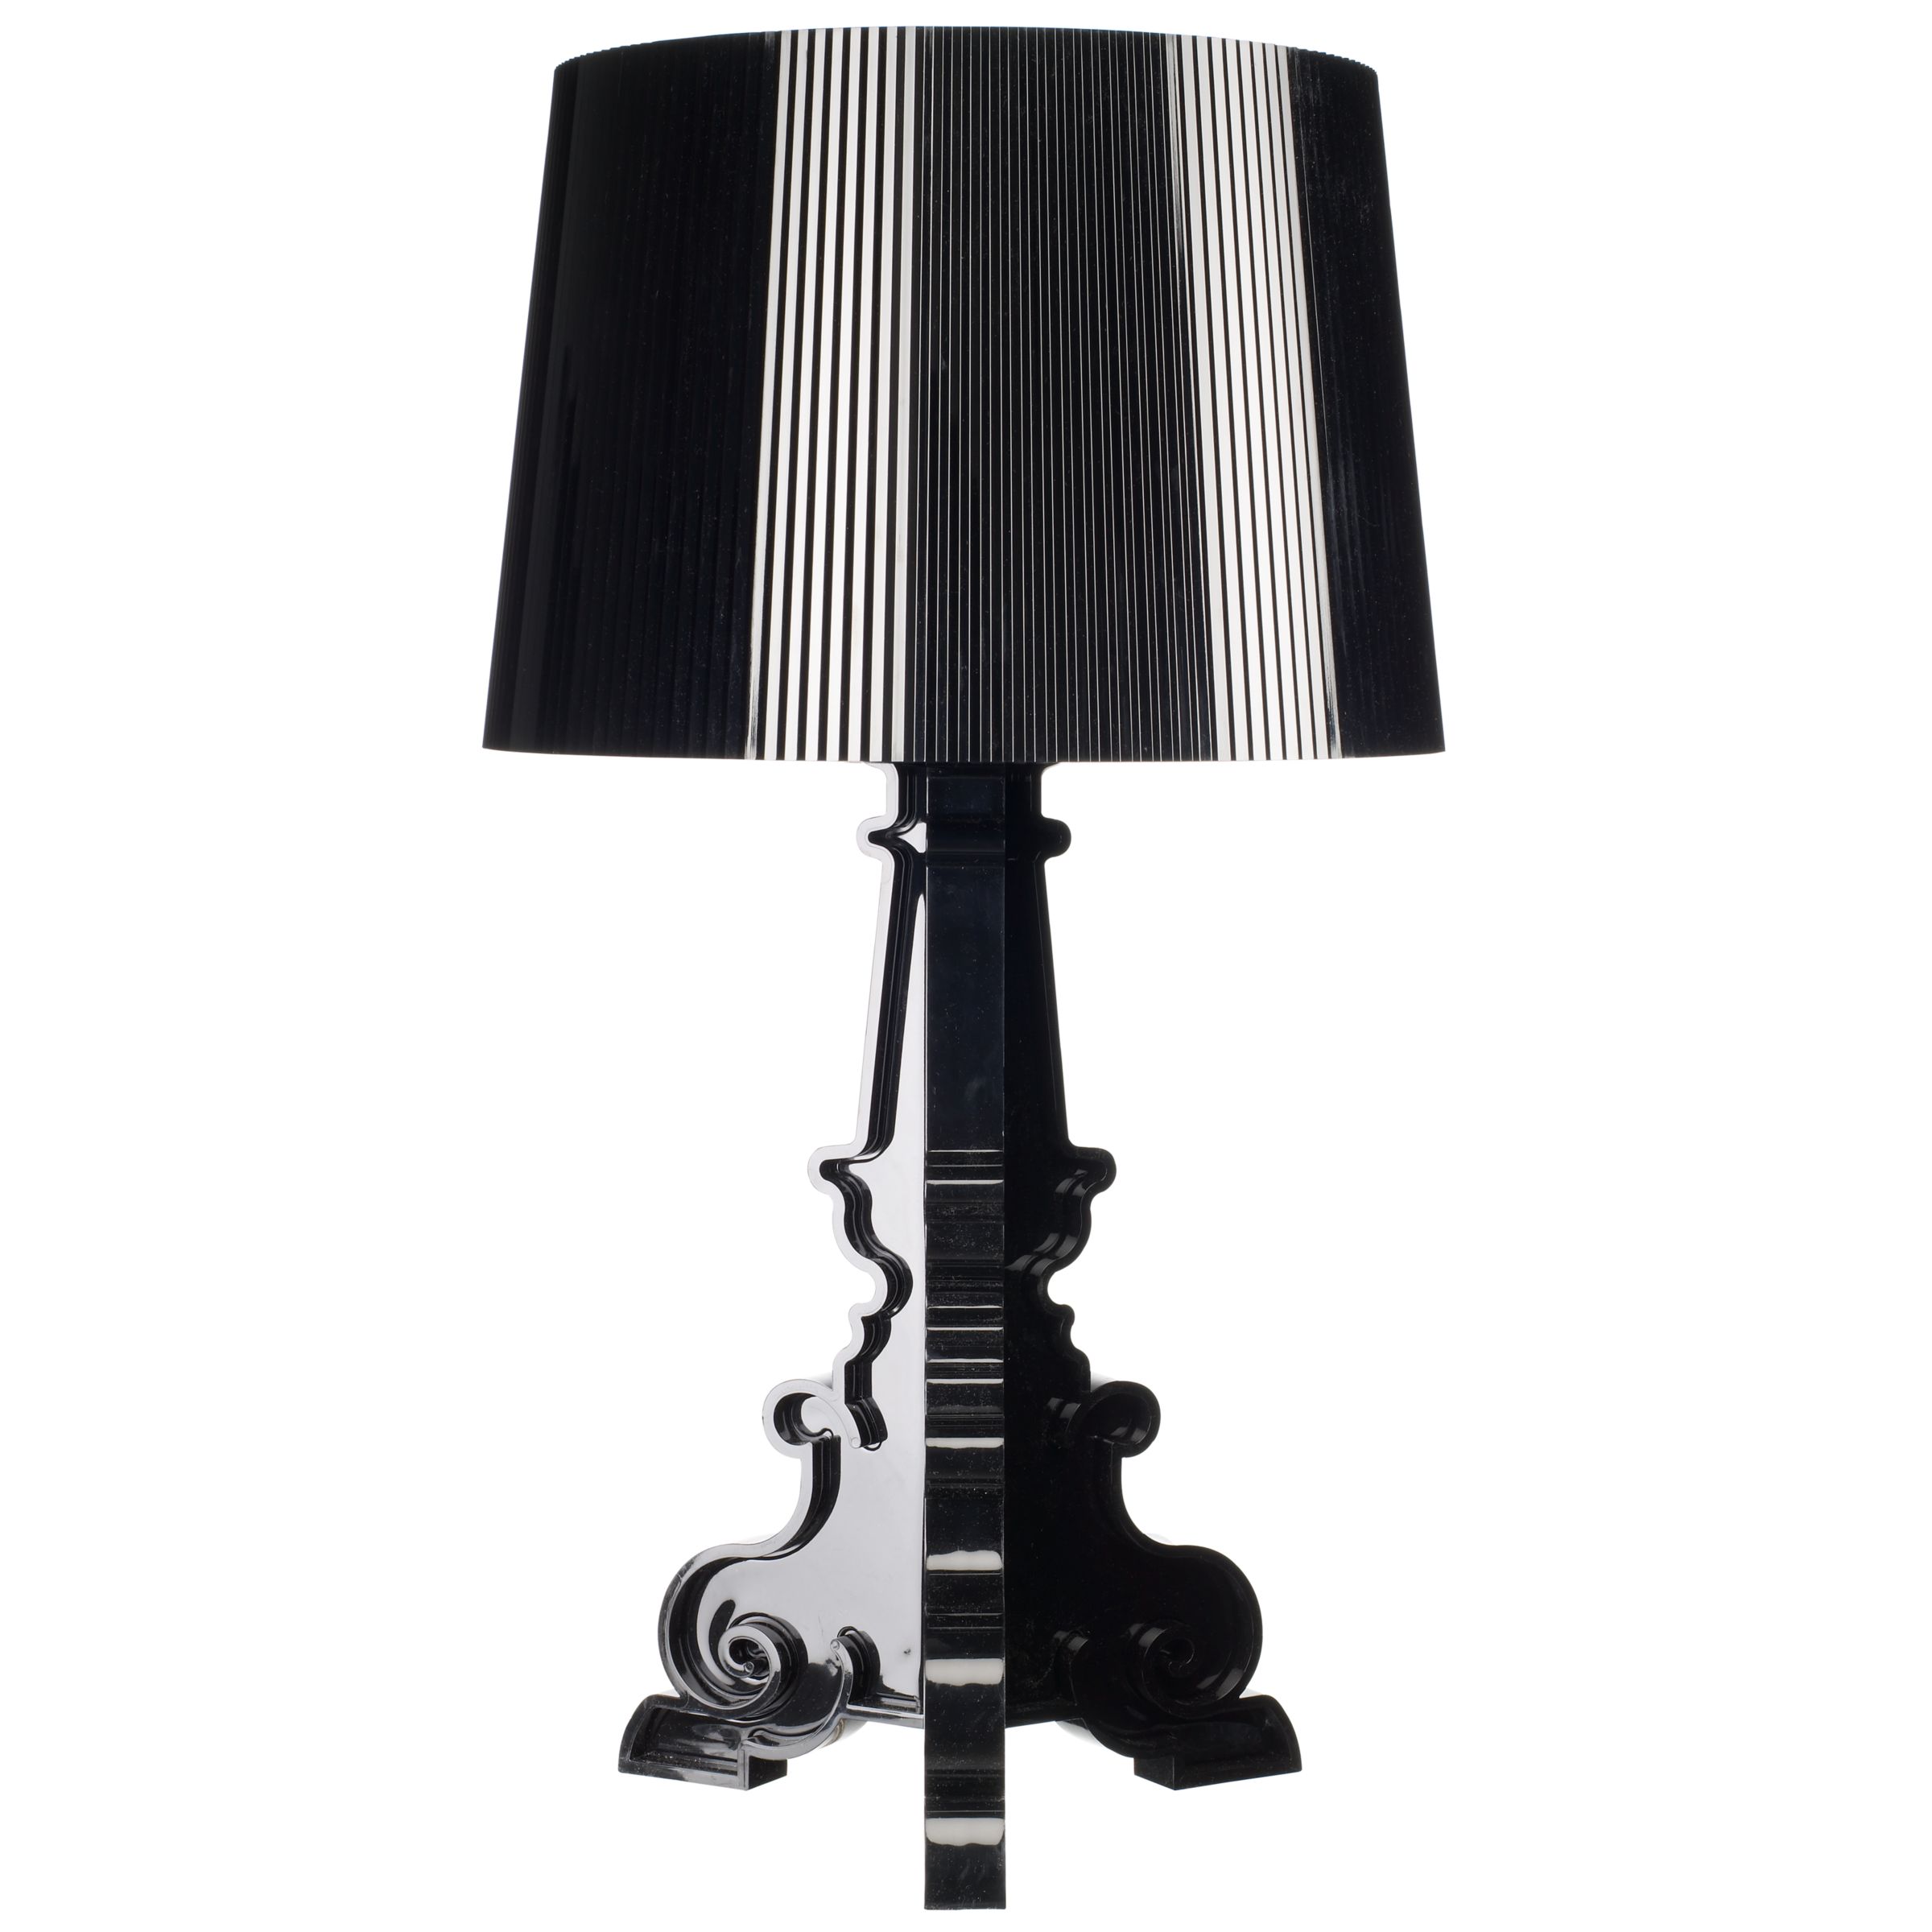 Kartell Bourgie Table Lamp, Black at JohnLewis